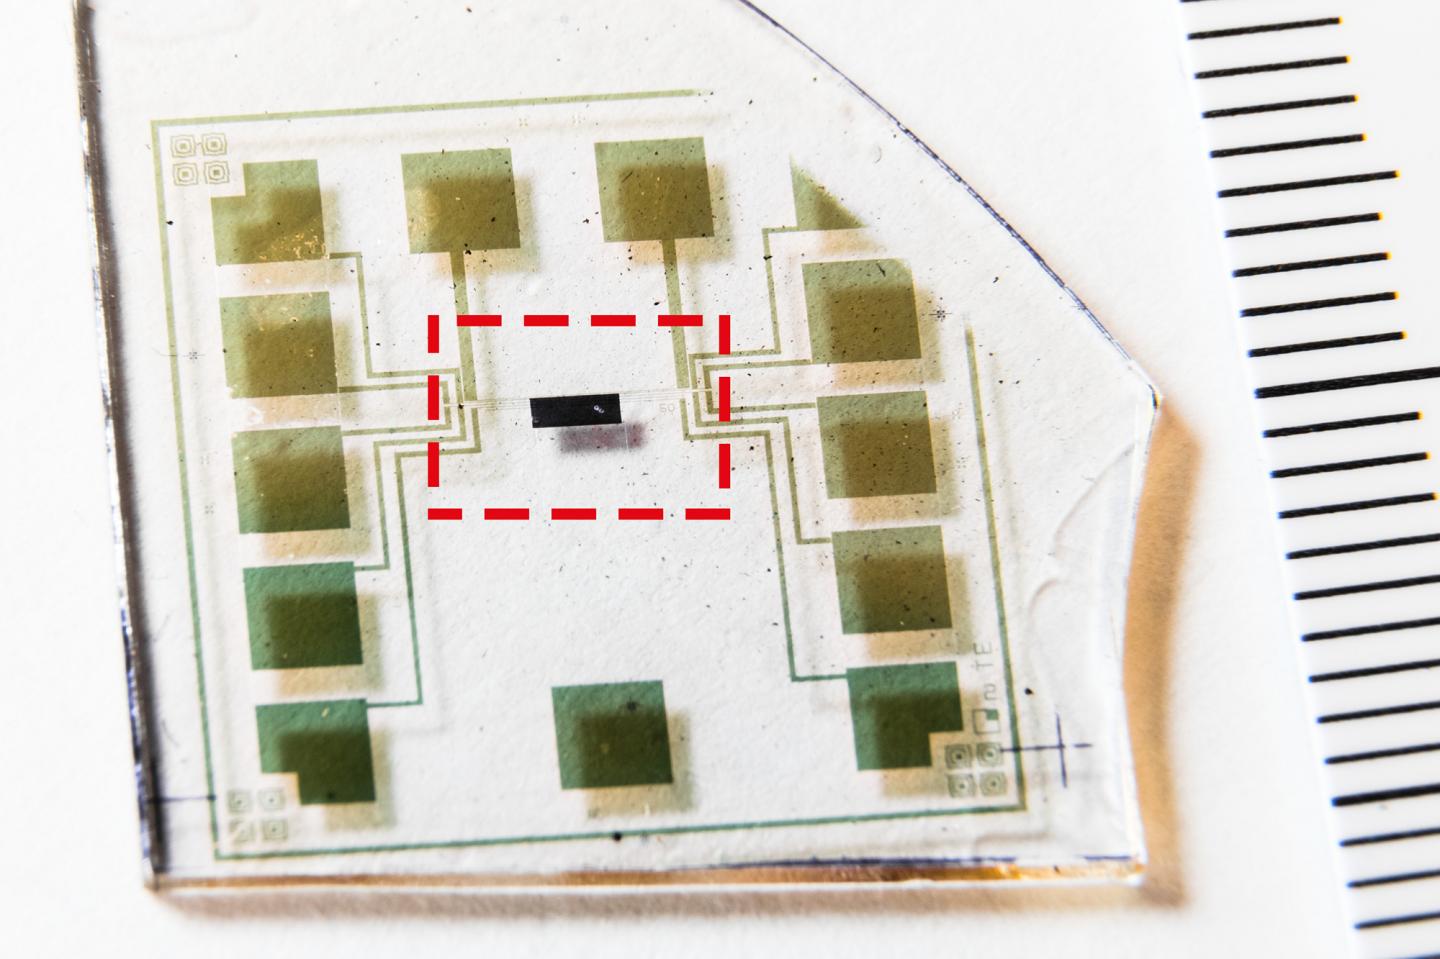 These are the world's first complementary electrochemical logic circuits. Source: Thor Balkhed